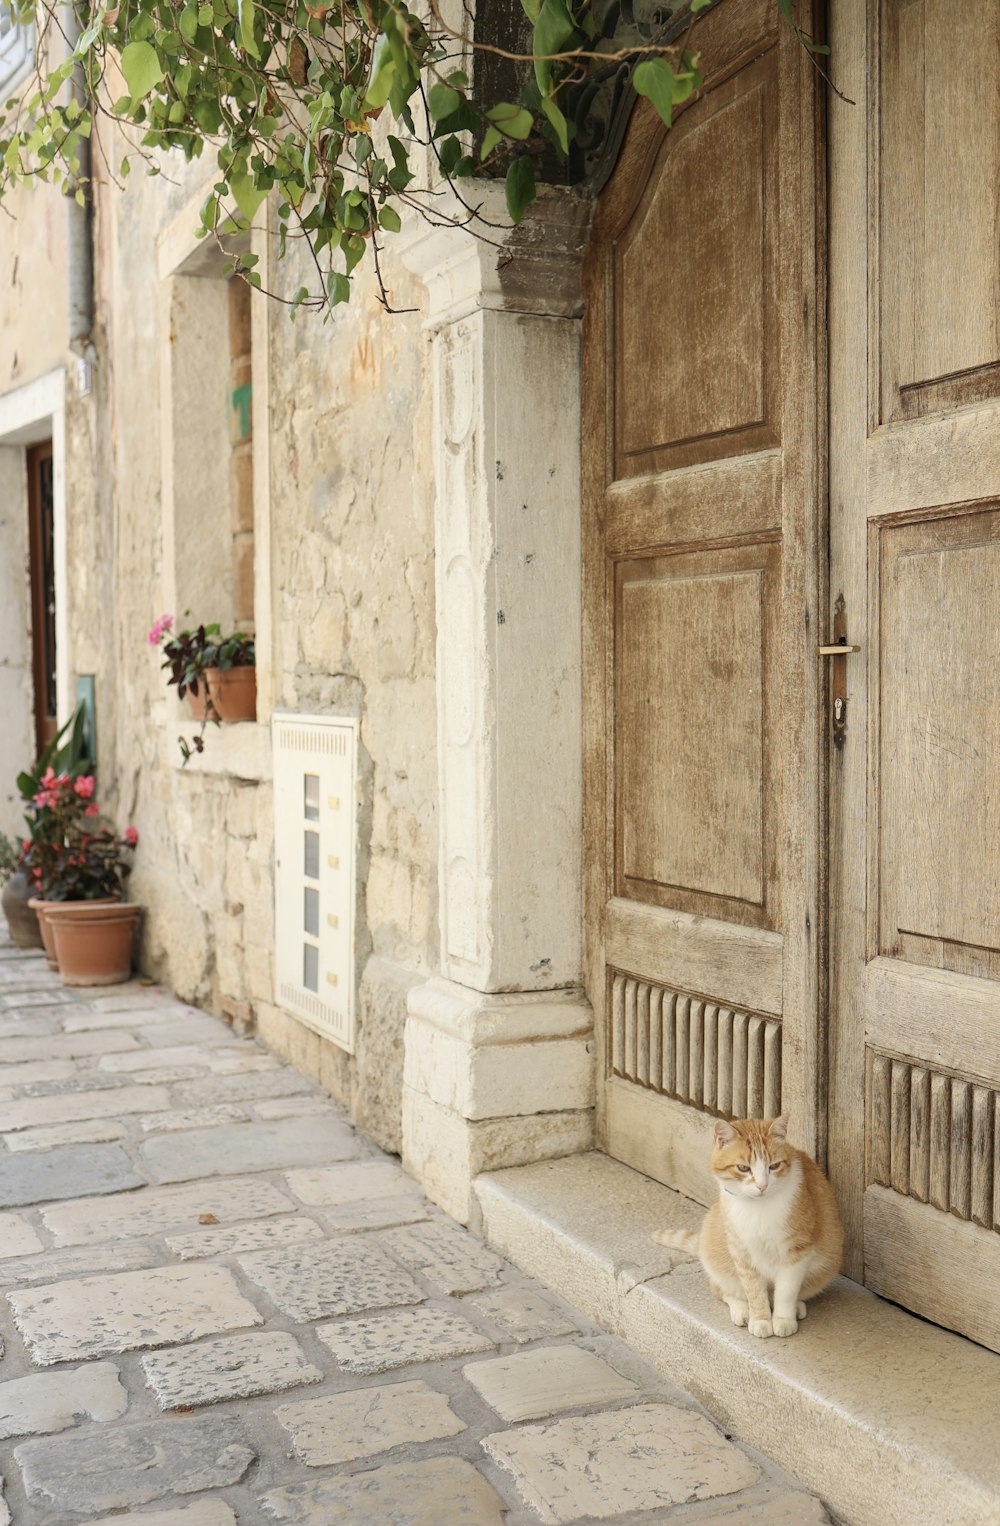 a cat sitting on a stone sidewalk next to a building